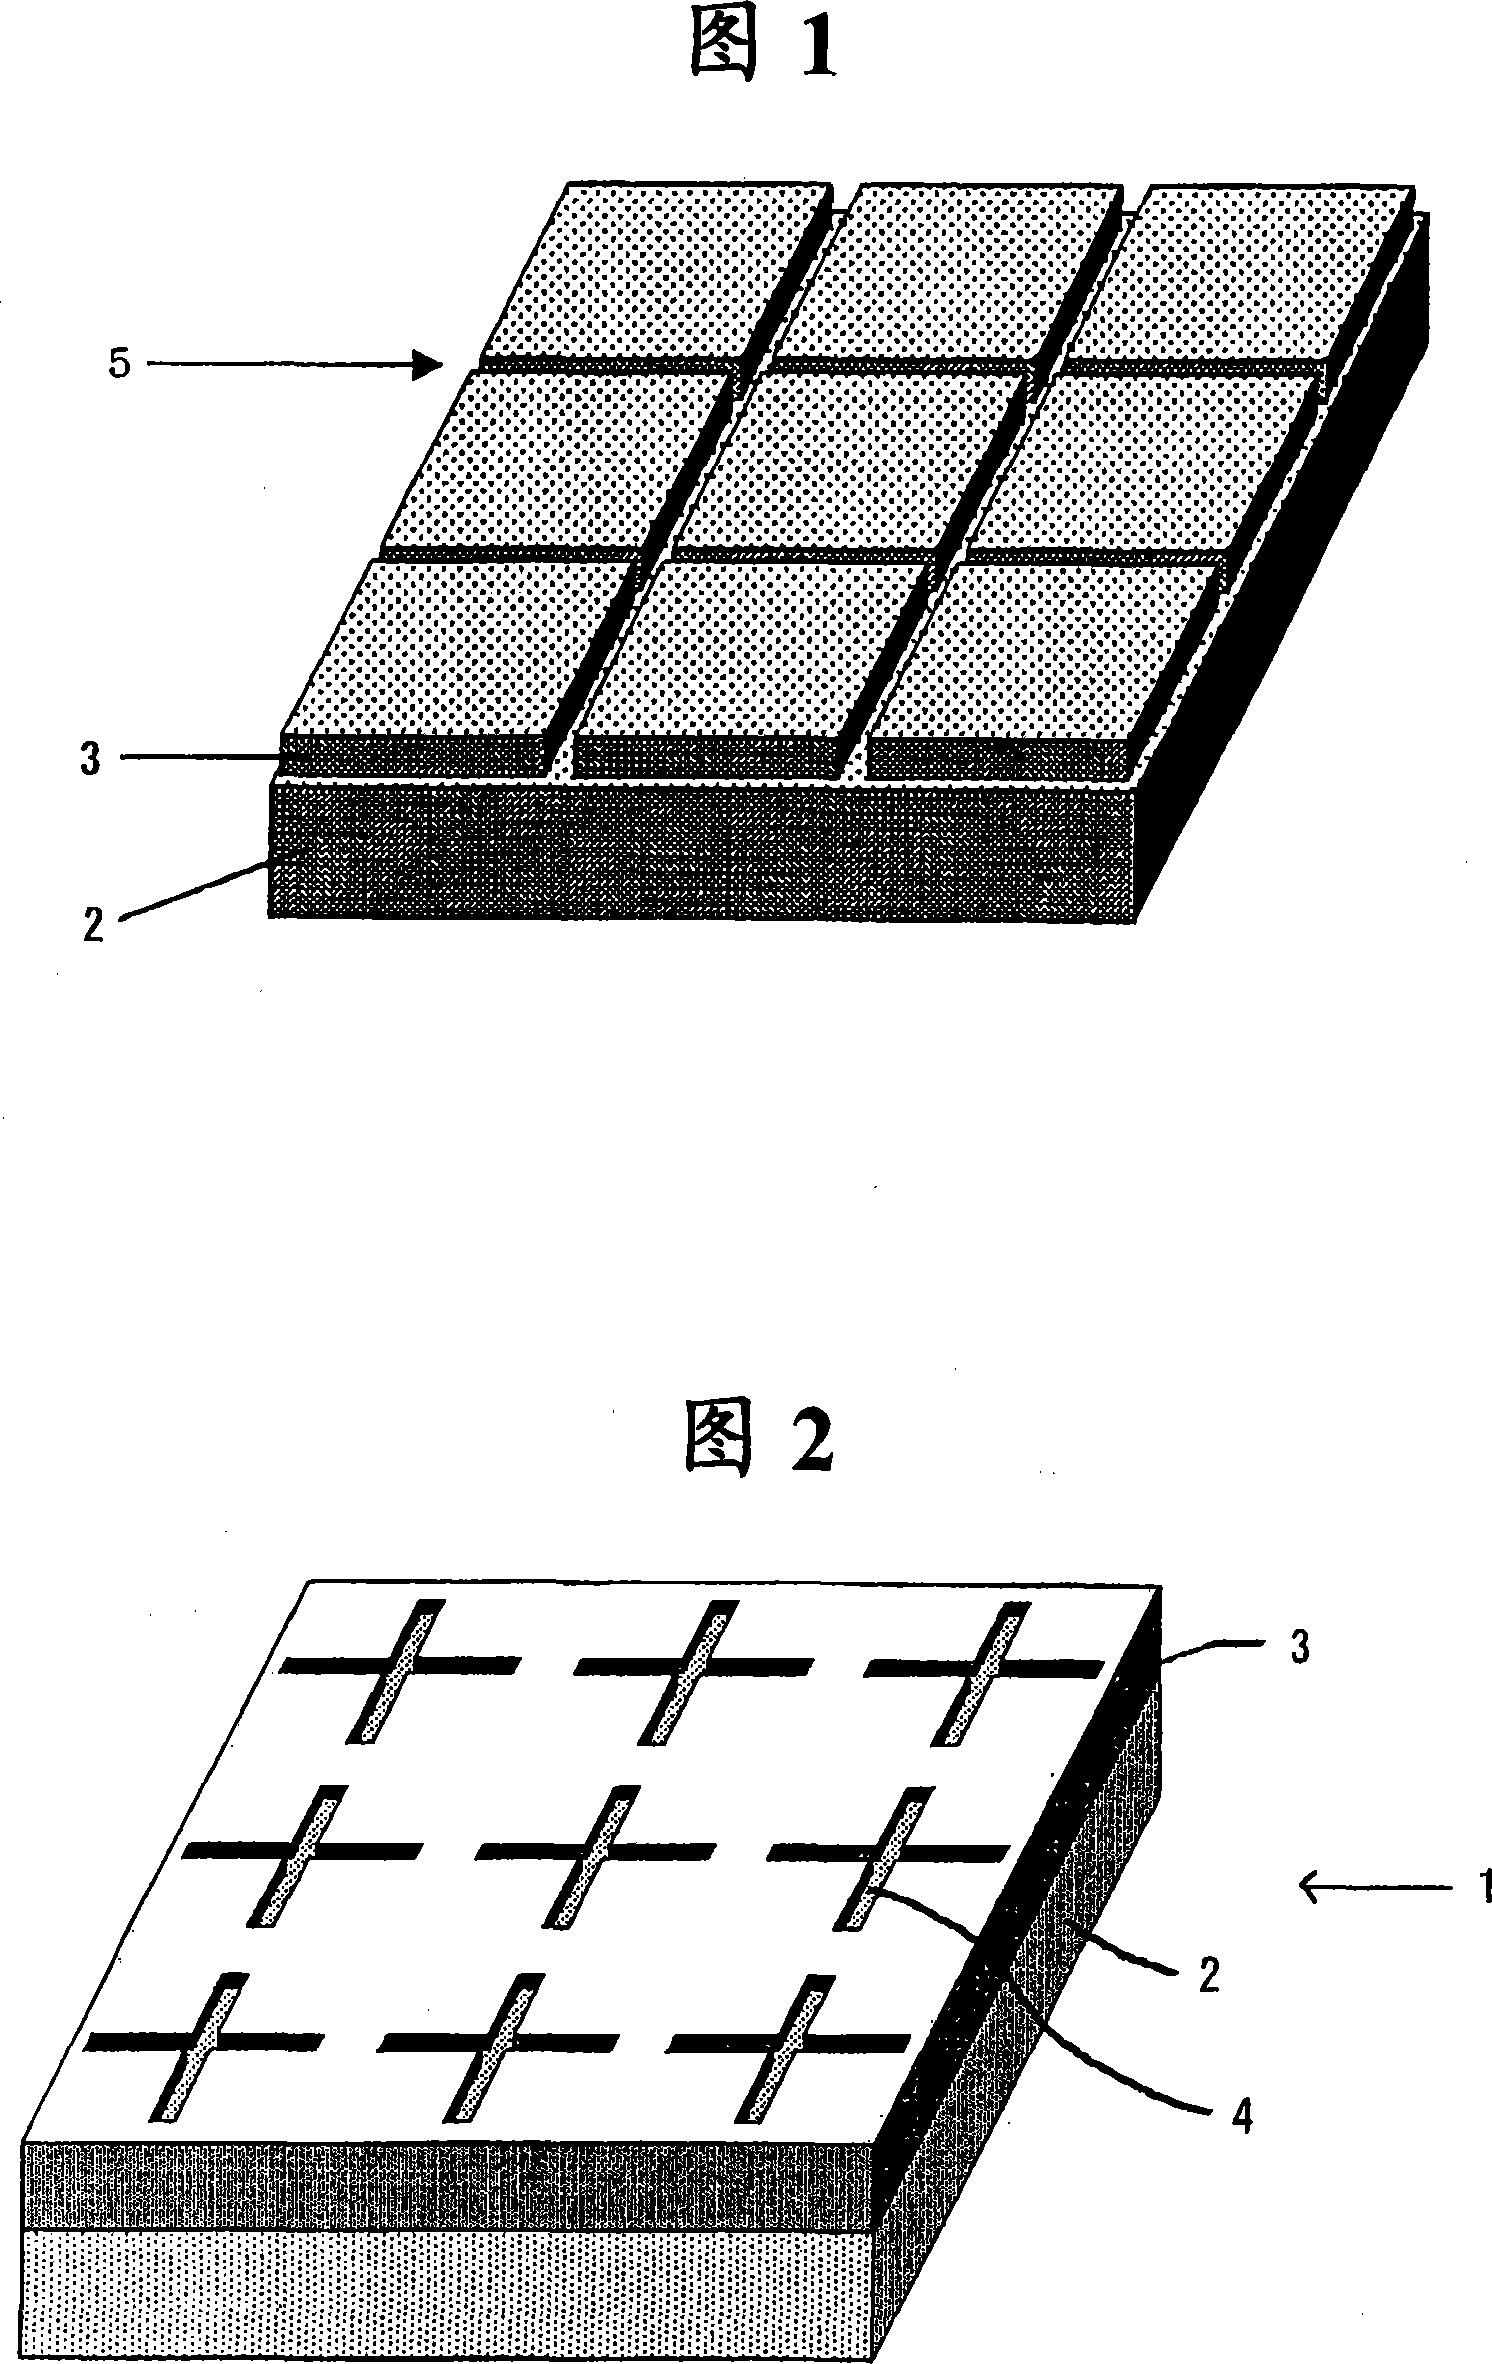 Adhesive sheet and release member